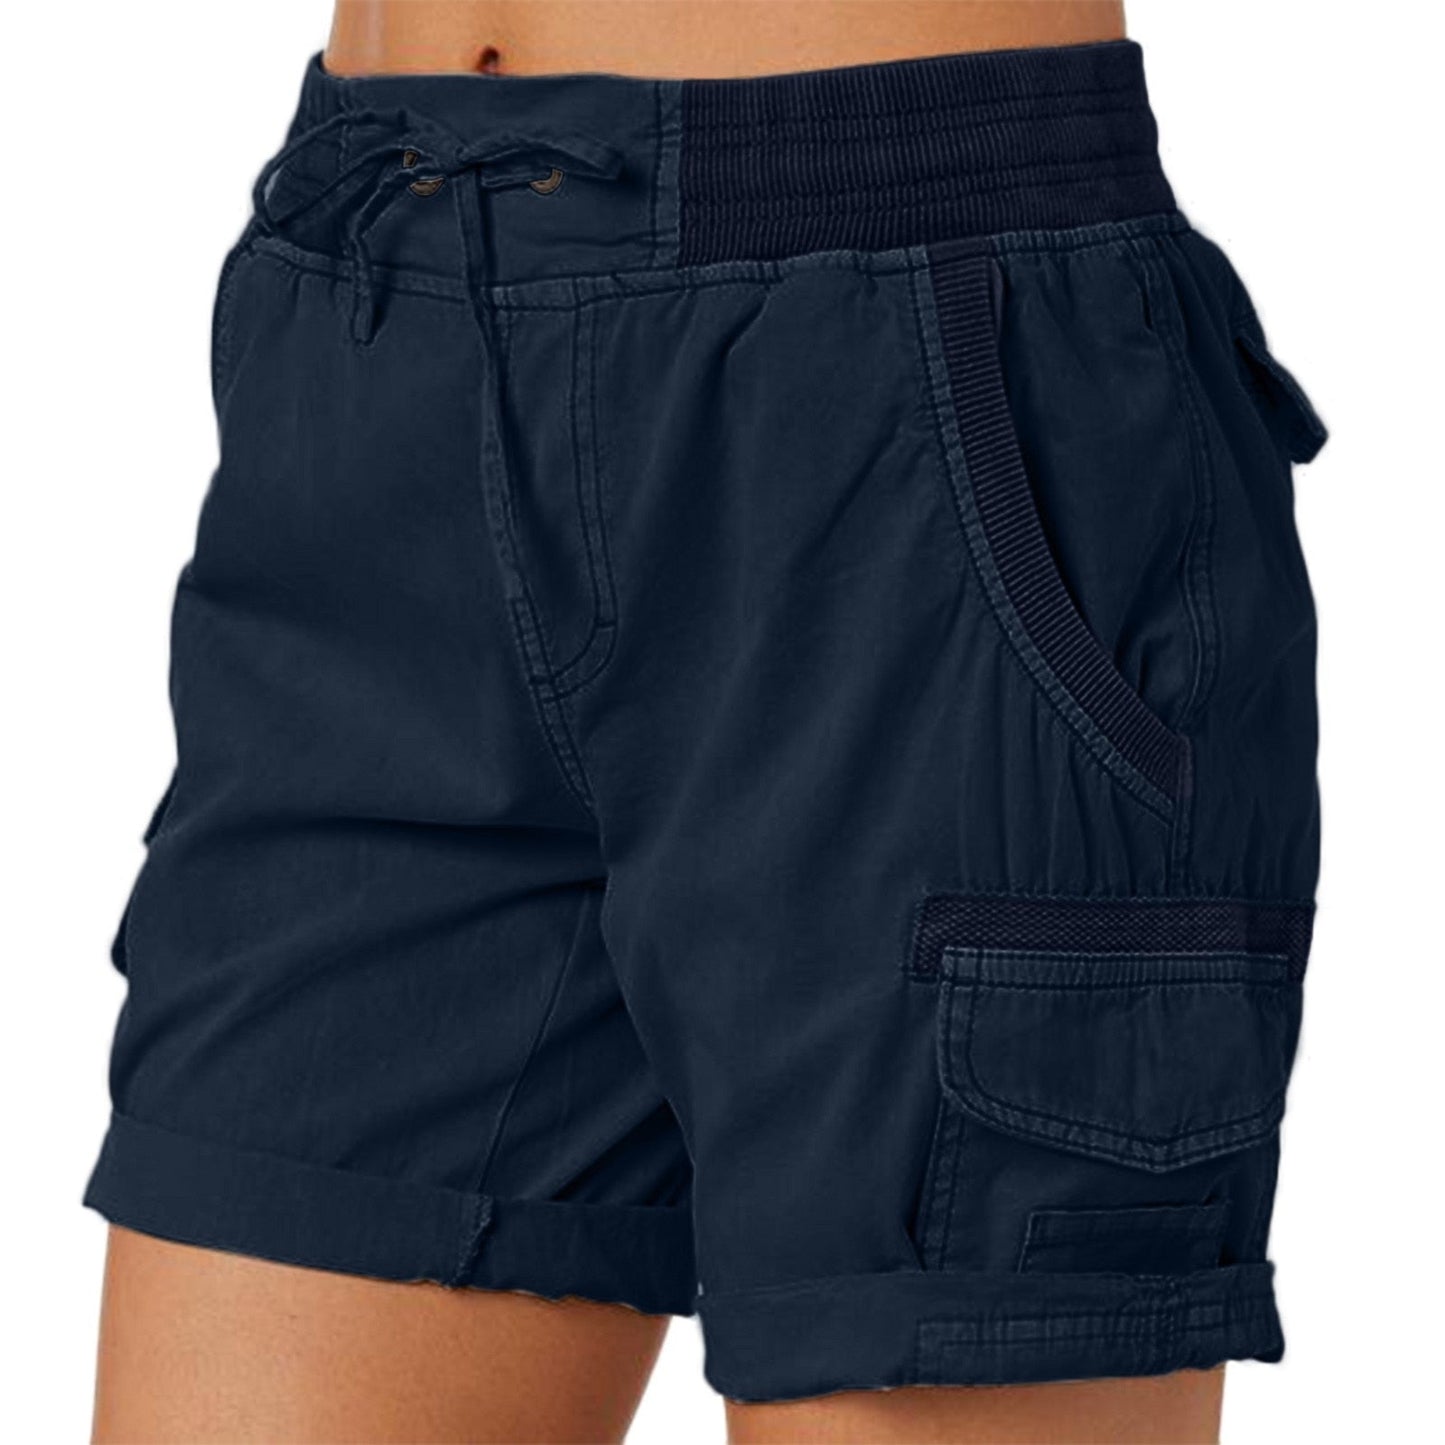 Cargo Shorts Women Loose With Pockets Short